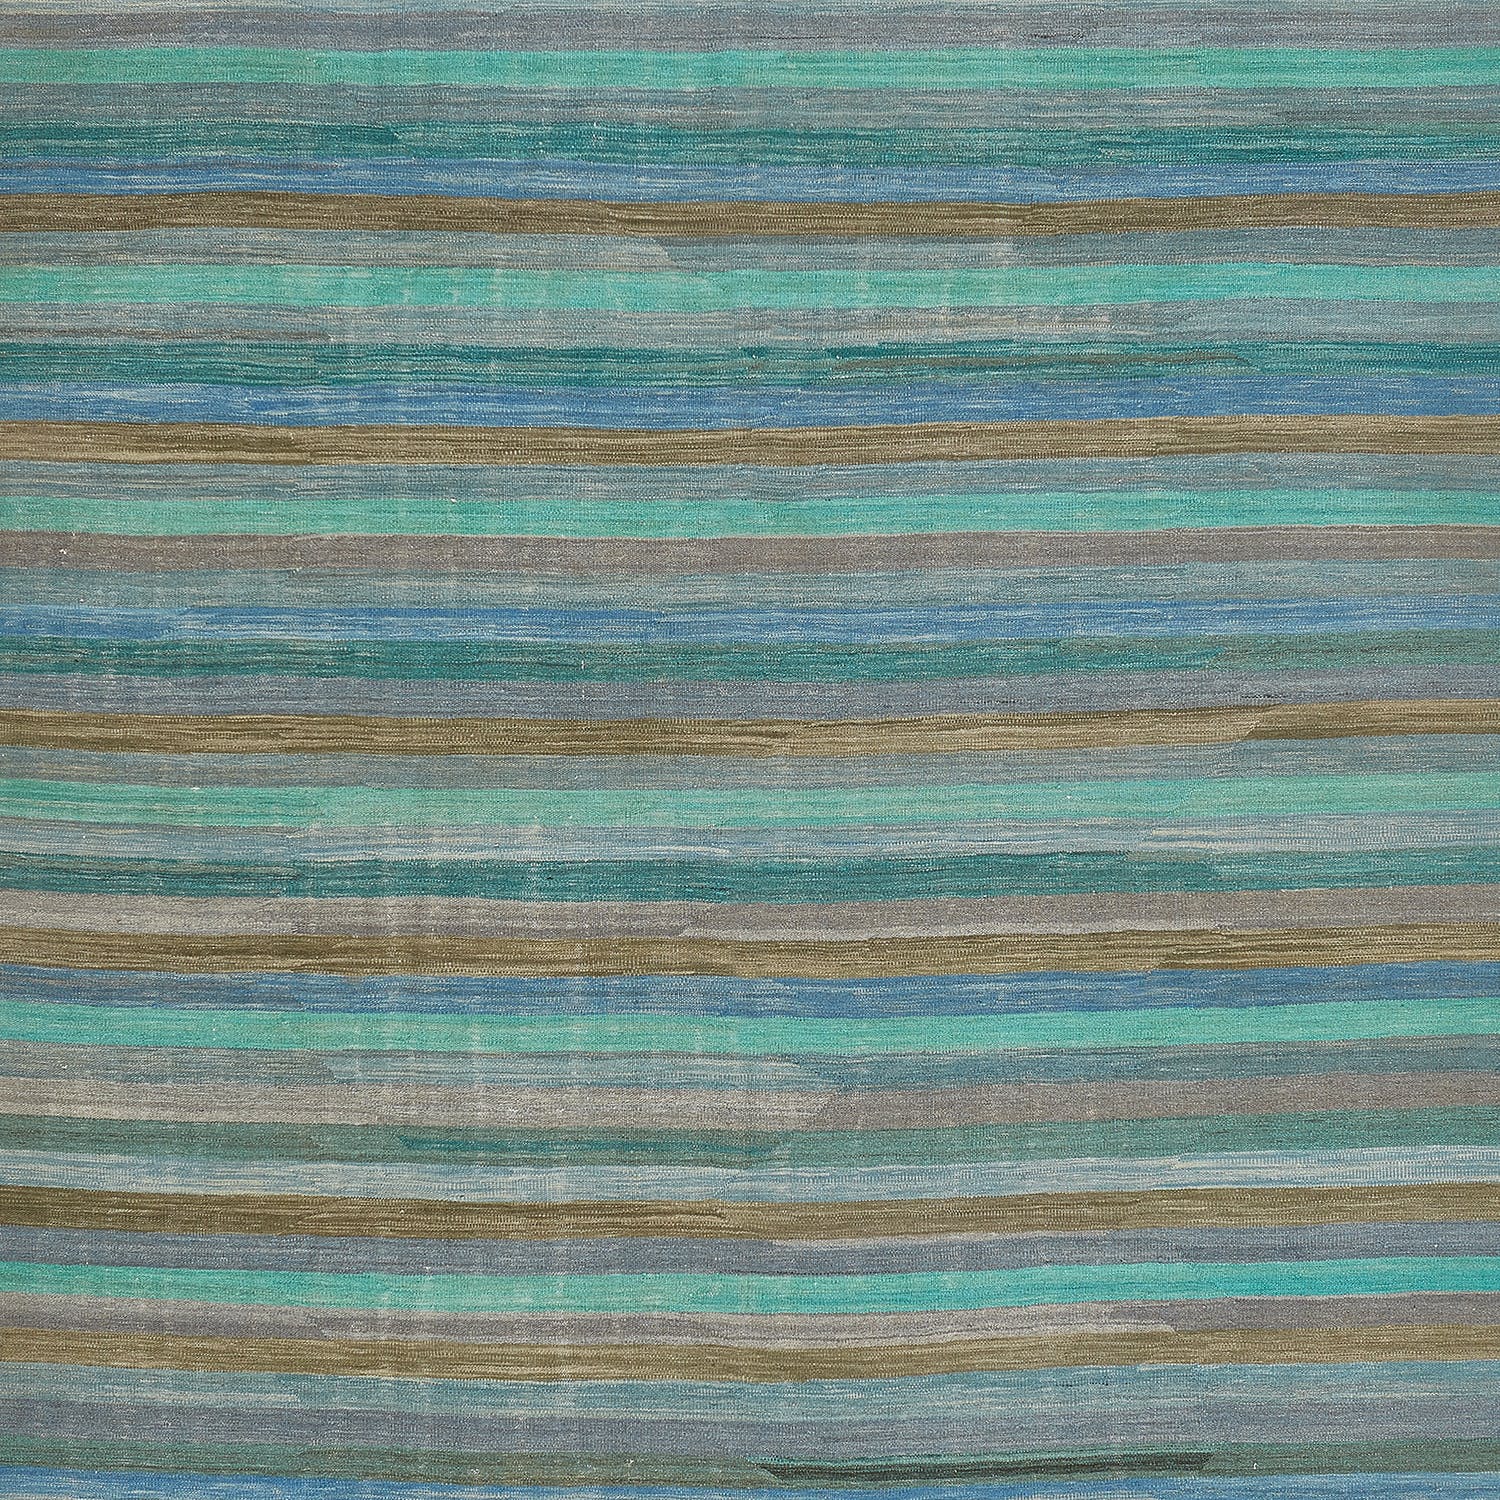 Abstract textured surface with rustic, unevenly colored horizontal stripes.